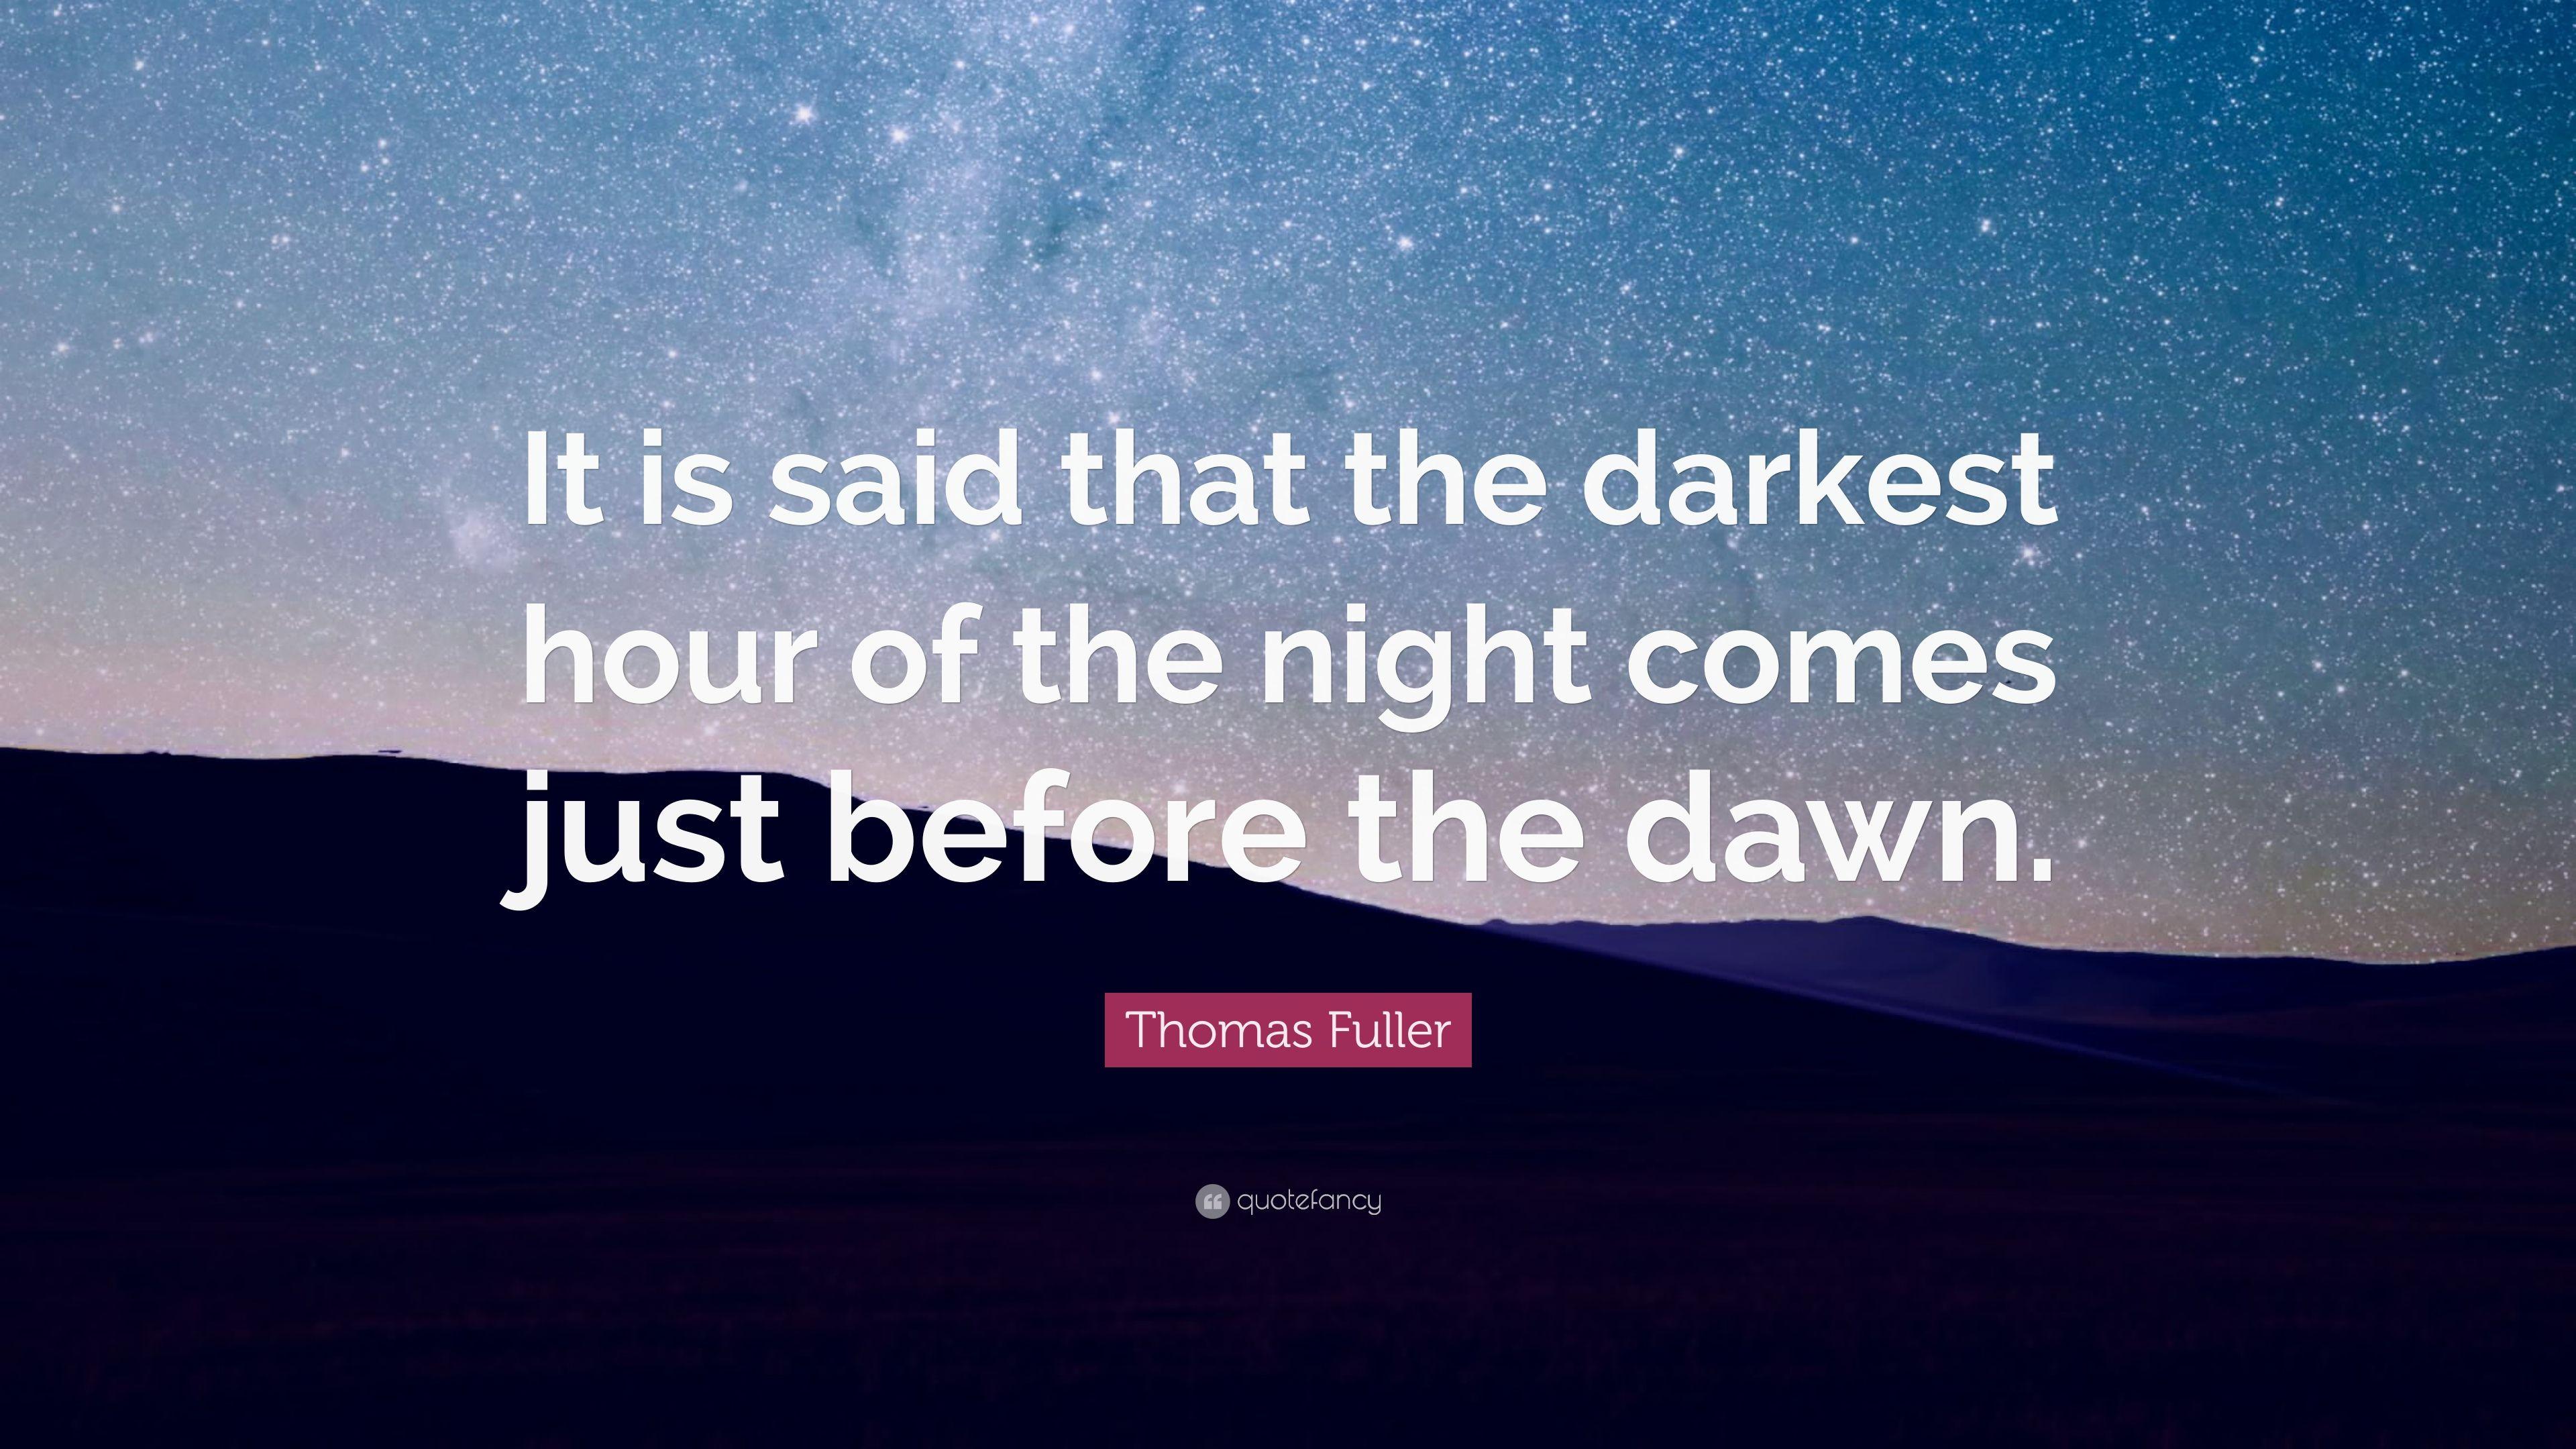 Thomas Fuller Quote: “It is said that the darkest hour